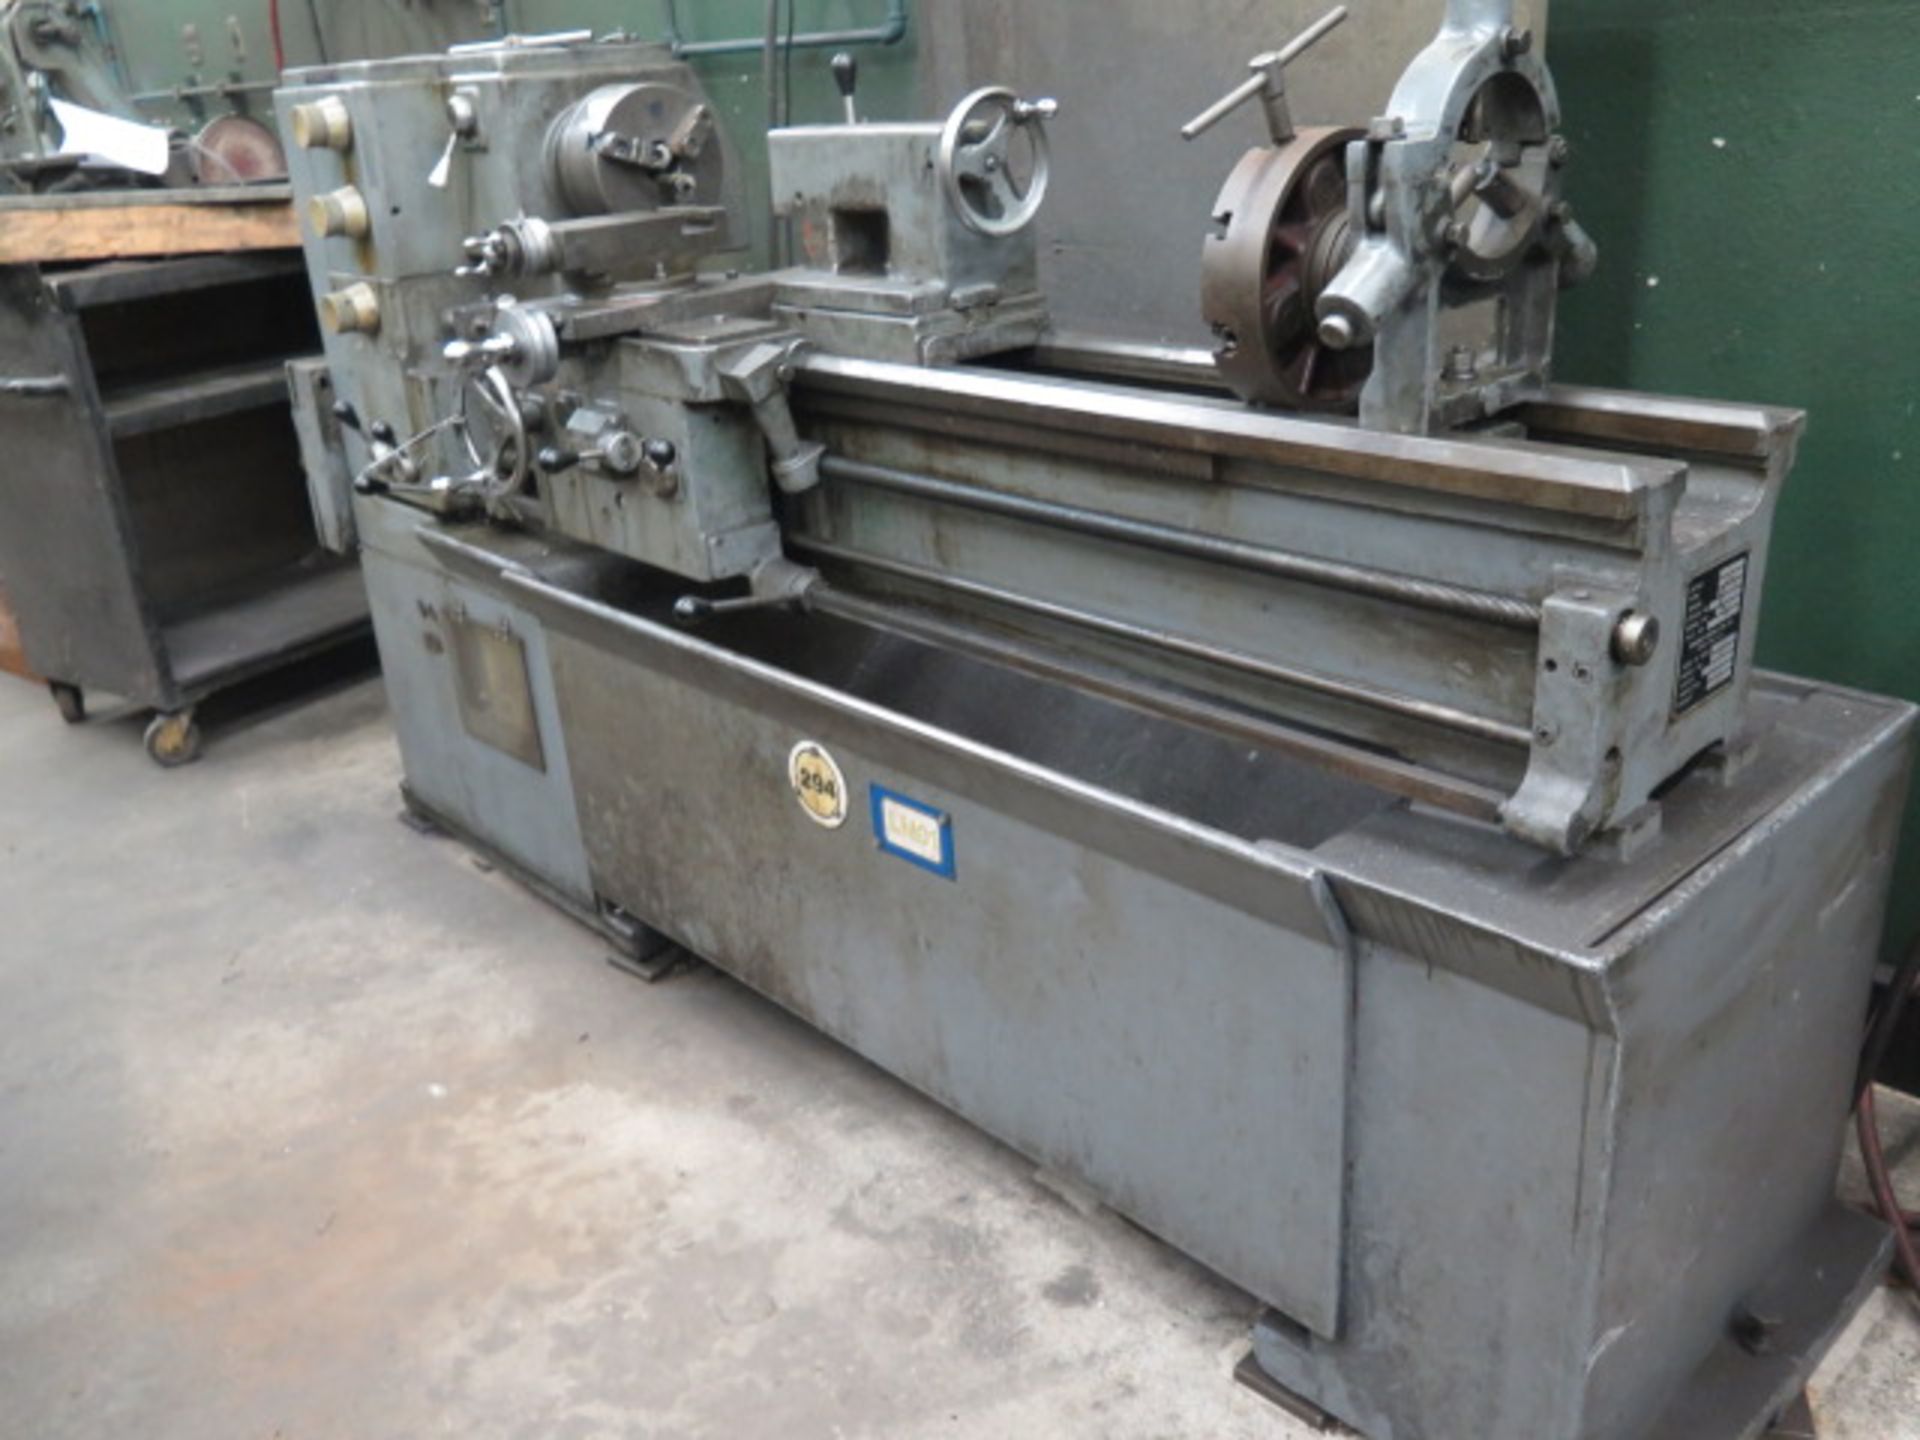 Merit 15" x 42" Lathe s/n 48752 w/ 30-1800 RPM, Inch Threading, Tailstock, Steady Rest, SOLD AS IS - Image 3 of 10